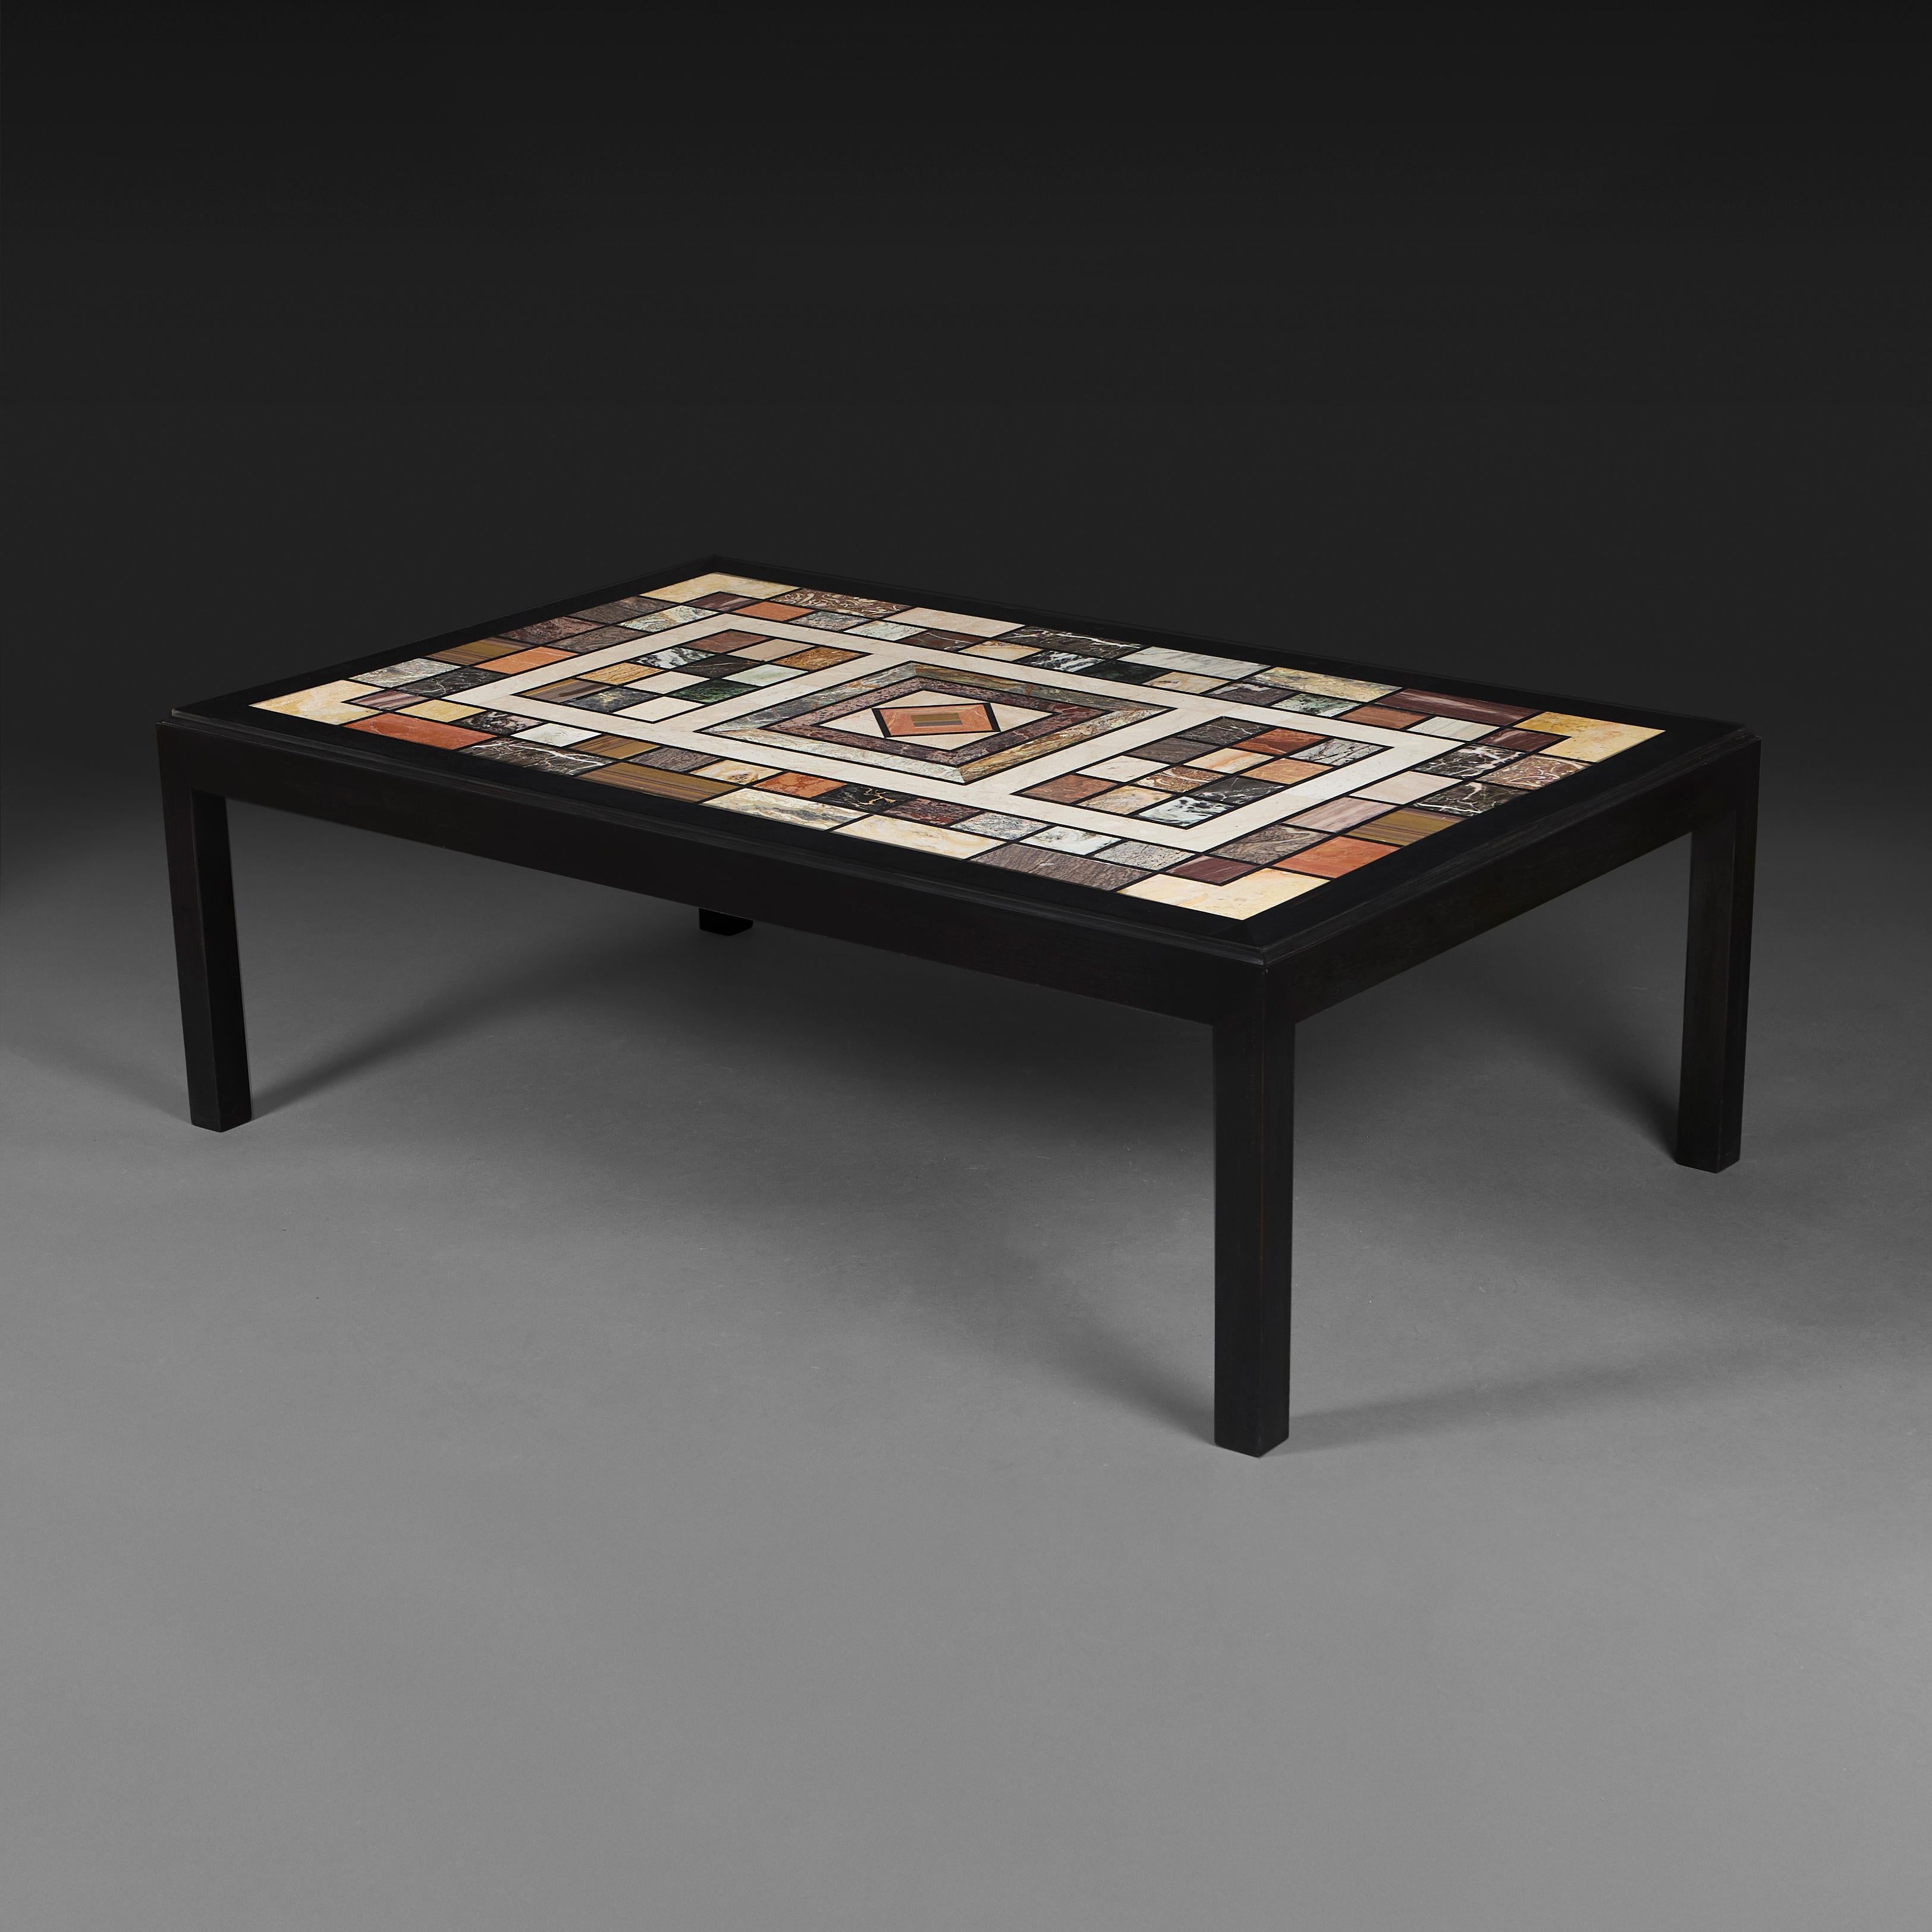 Italy, circa 1940

An early twentieth century coffee table of large scale, with specimen marble top, the granite borders veneered with samples of many varied European marbles, including Black Portoro, Rojo Alicante, Rosso Montepulciano, Guatemala